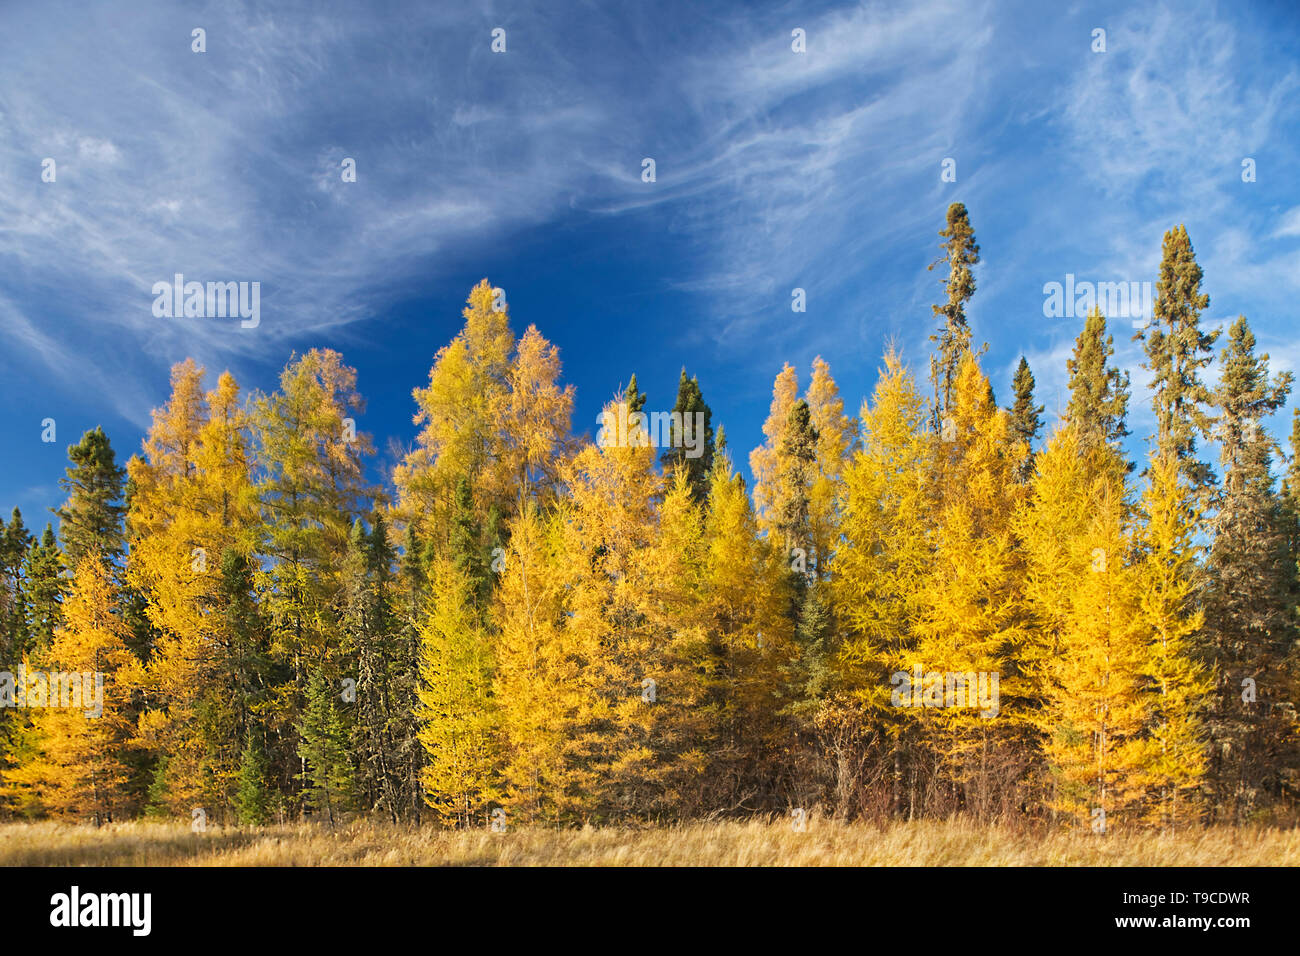 Boreal forest of Black spruce (Picea mariana) and eastern larch / tamarack (Larix laricina) in autumn color Ear Falls Ontario Canada Stock Photo